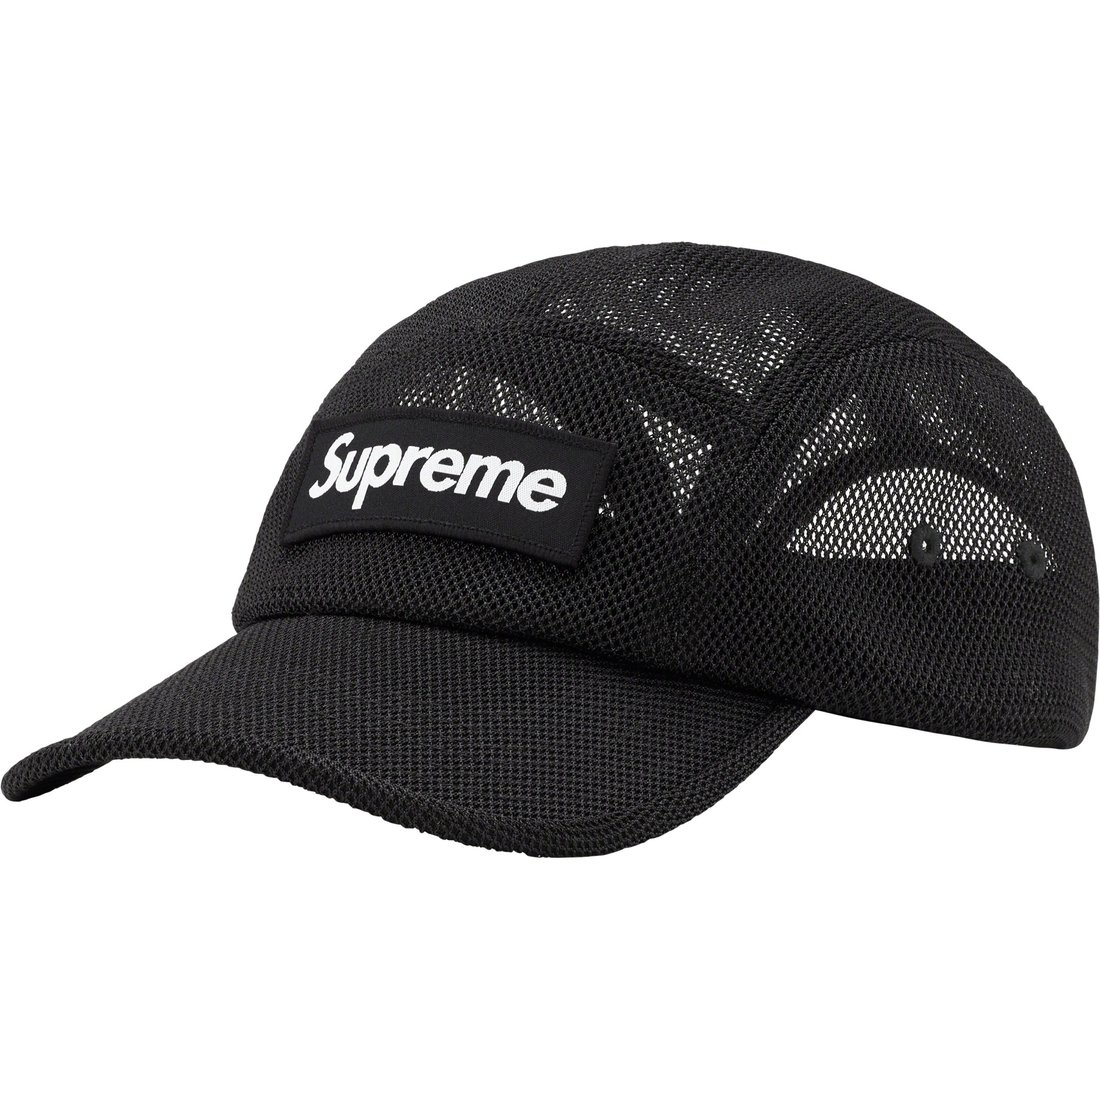 Details on Mesh Cordura Camp Cap Black from spring summer
                                                    2023 (Price is $54)